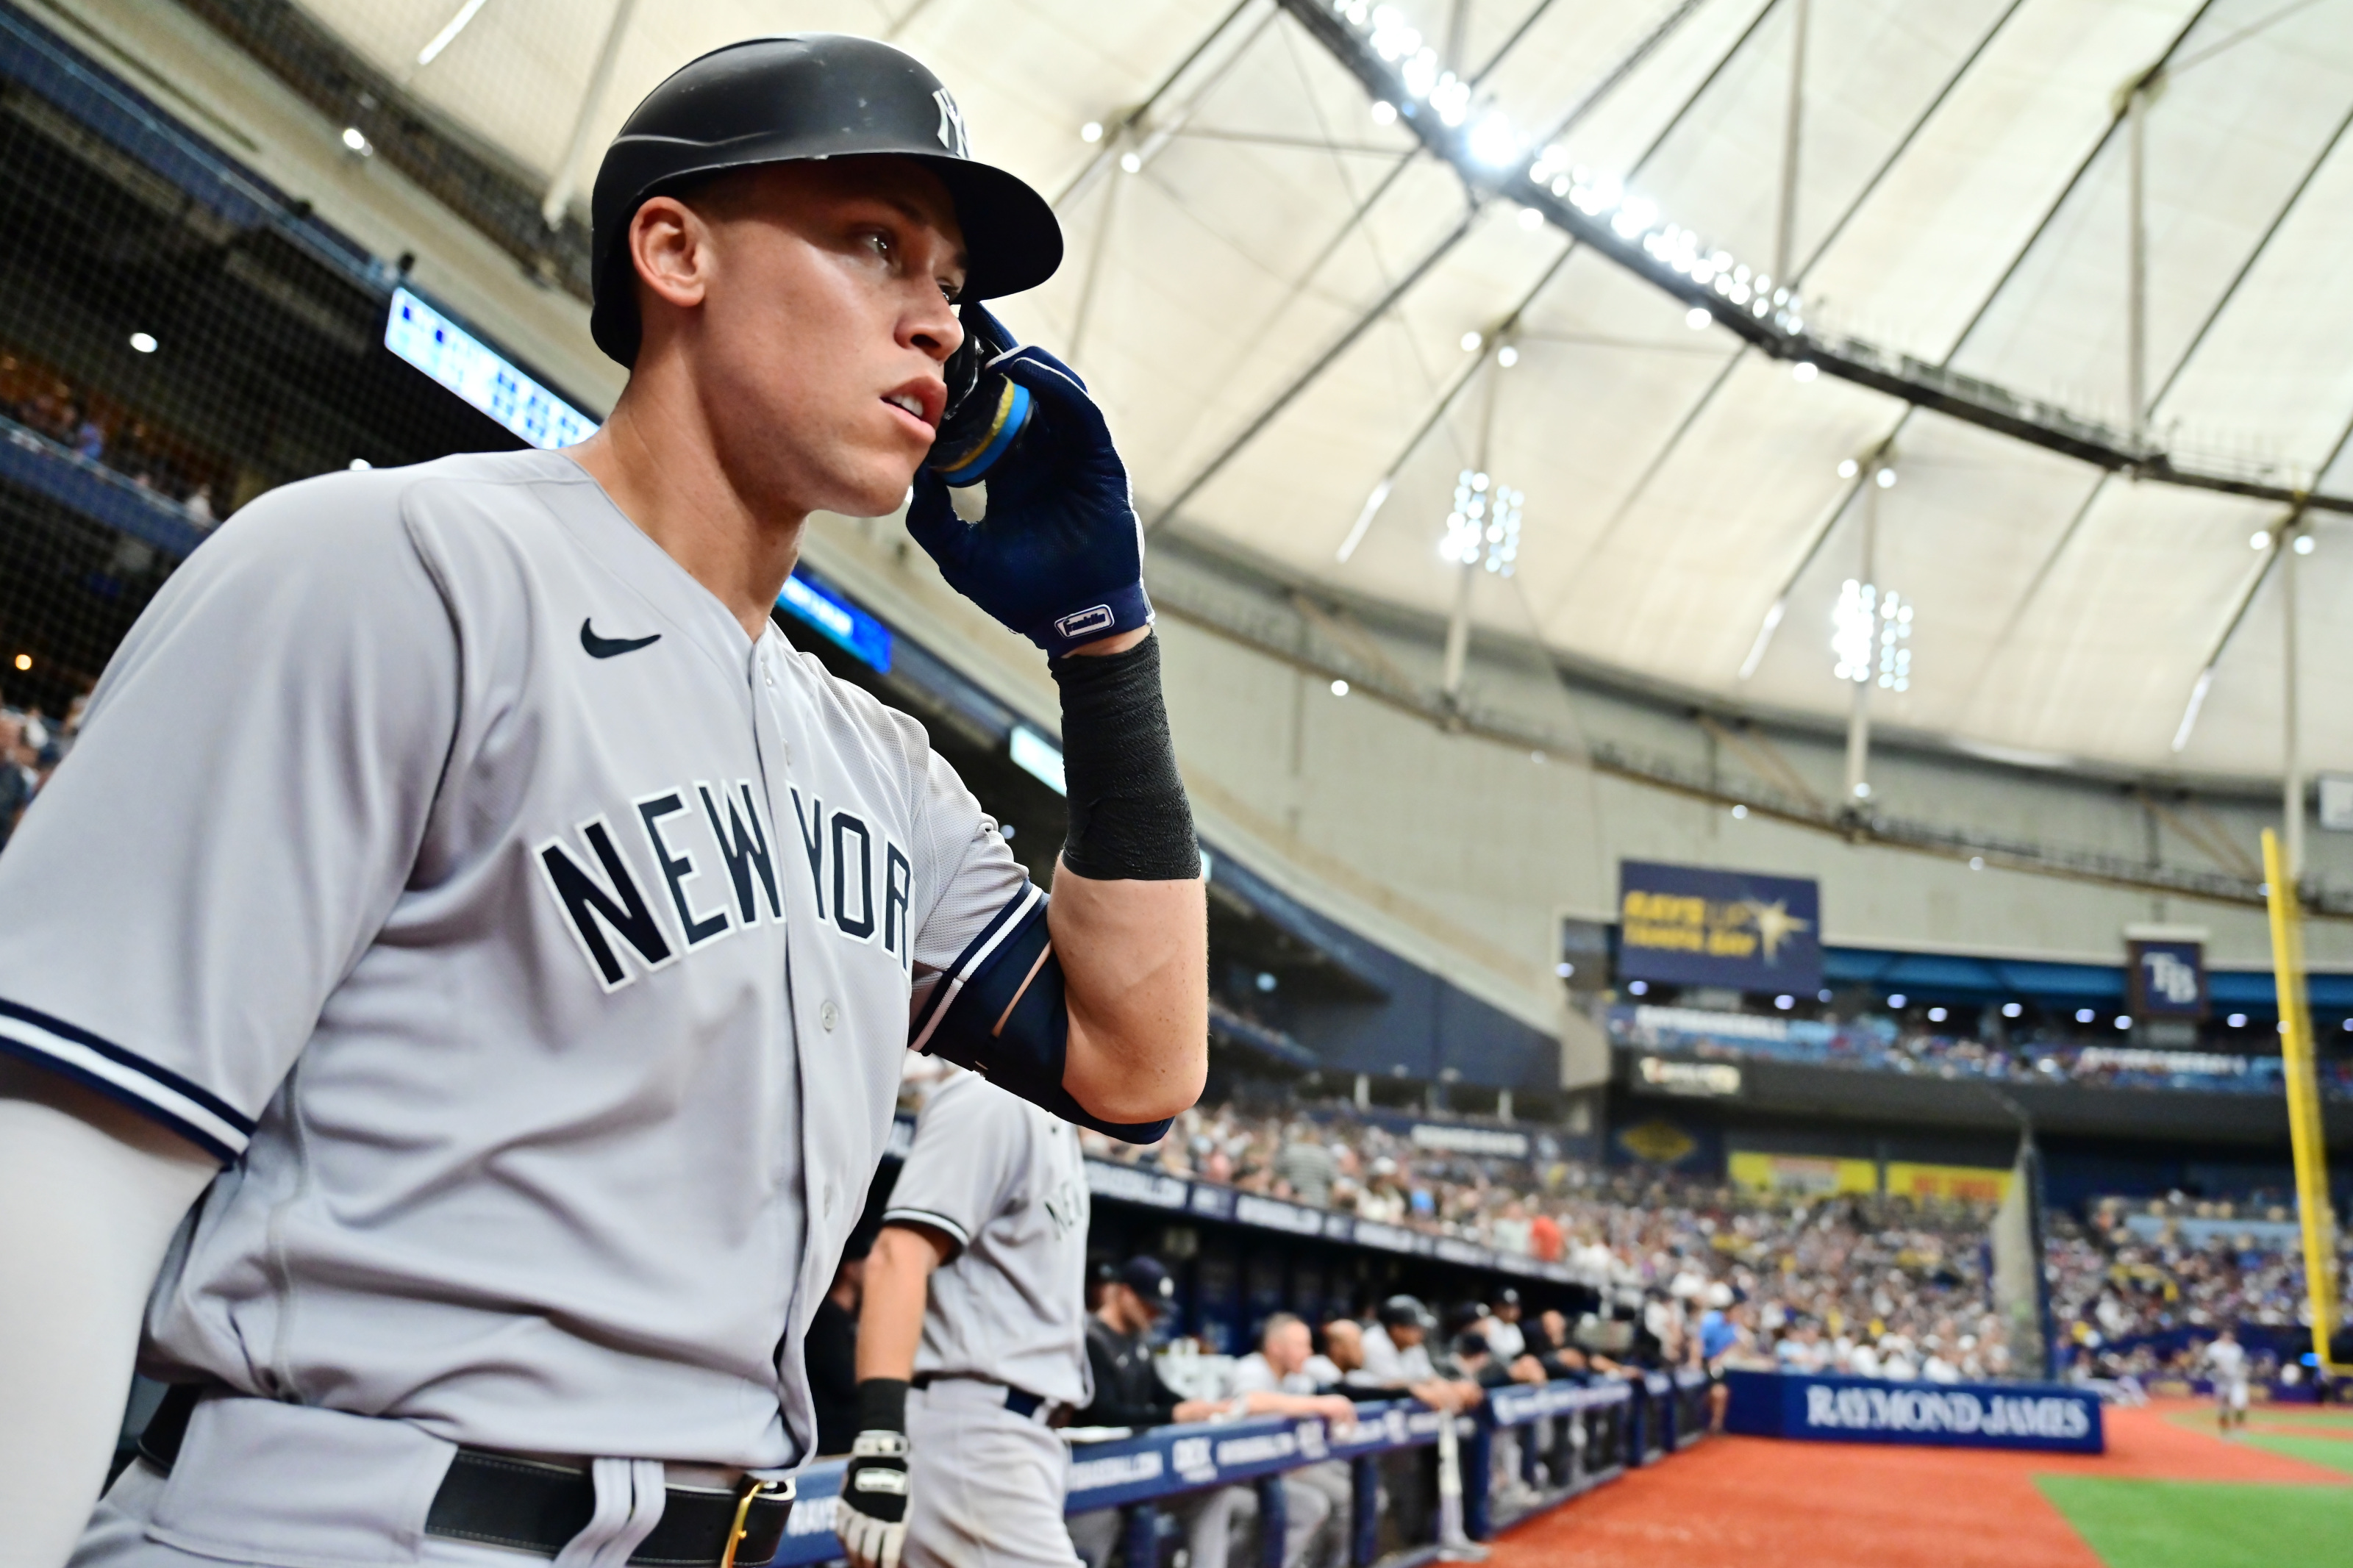 New Jersey Devils: Aaron Judge Gives Us Taylor Hall Vibes